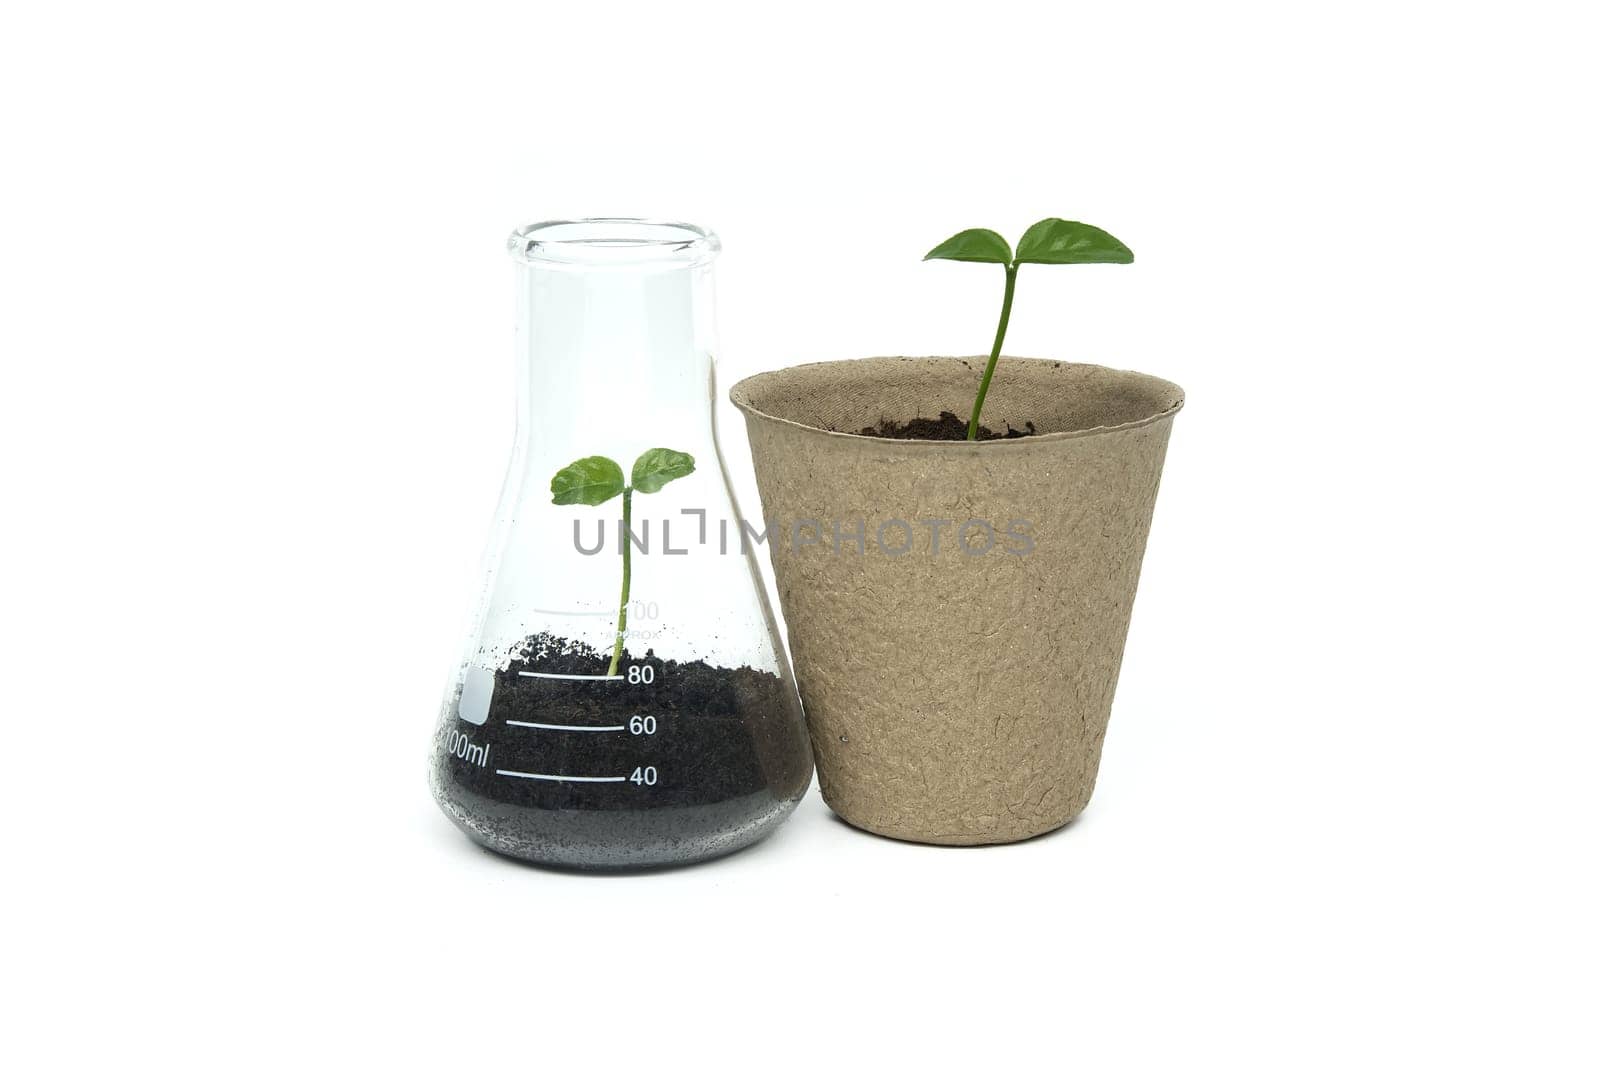 Green seedlings in biodegradable pots and glass flask by NetPix